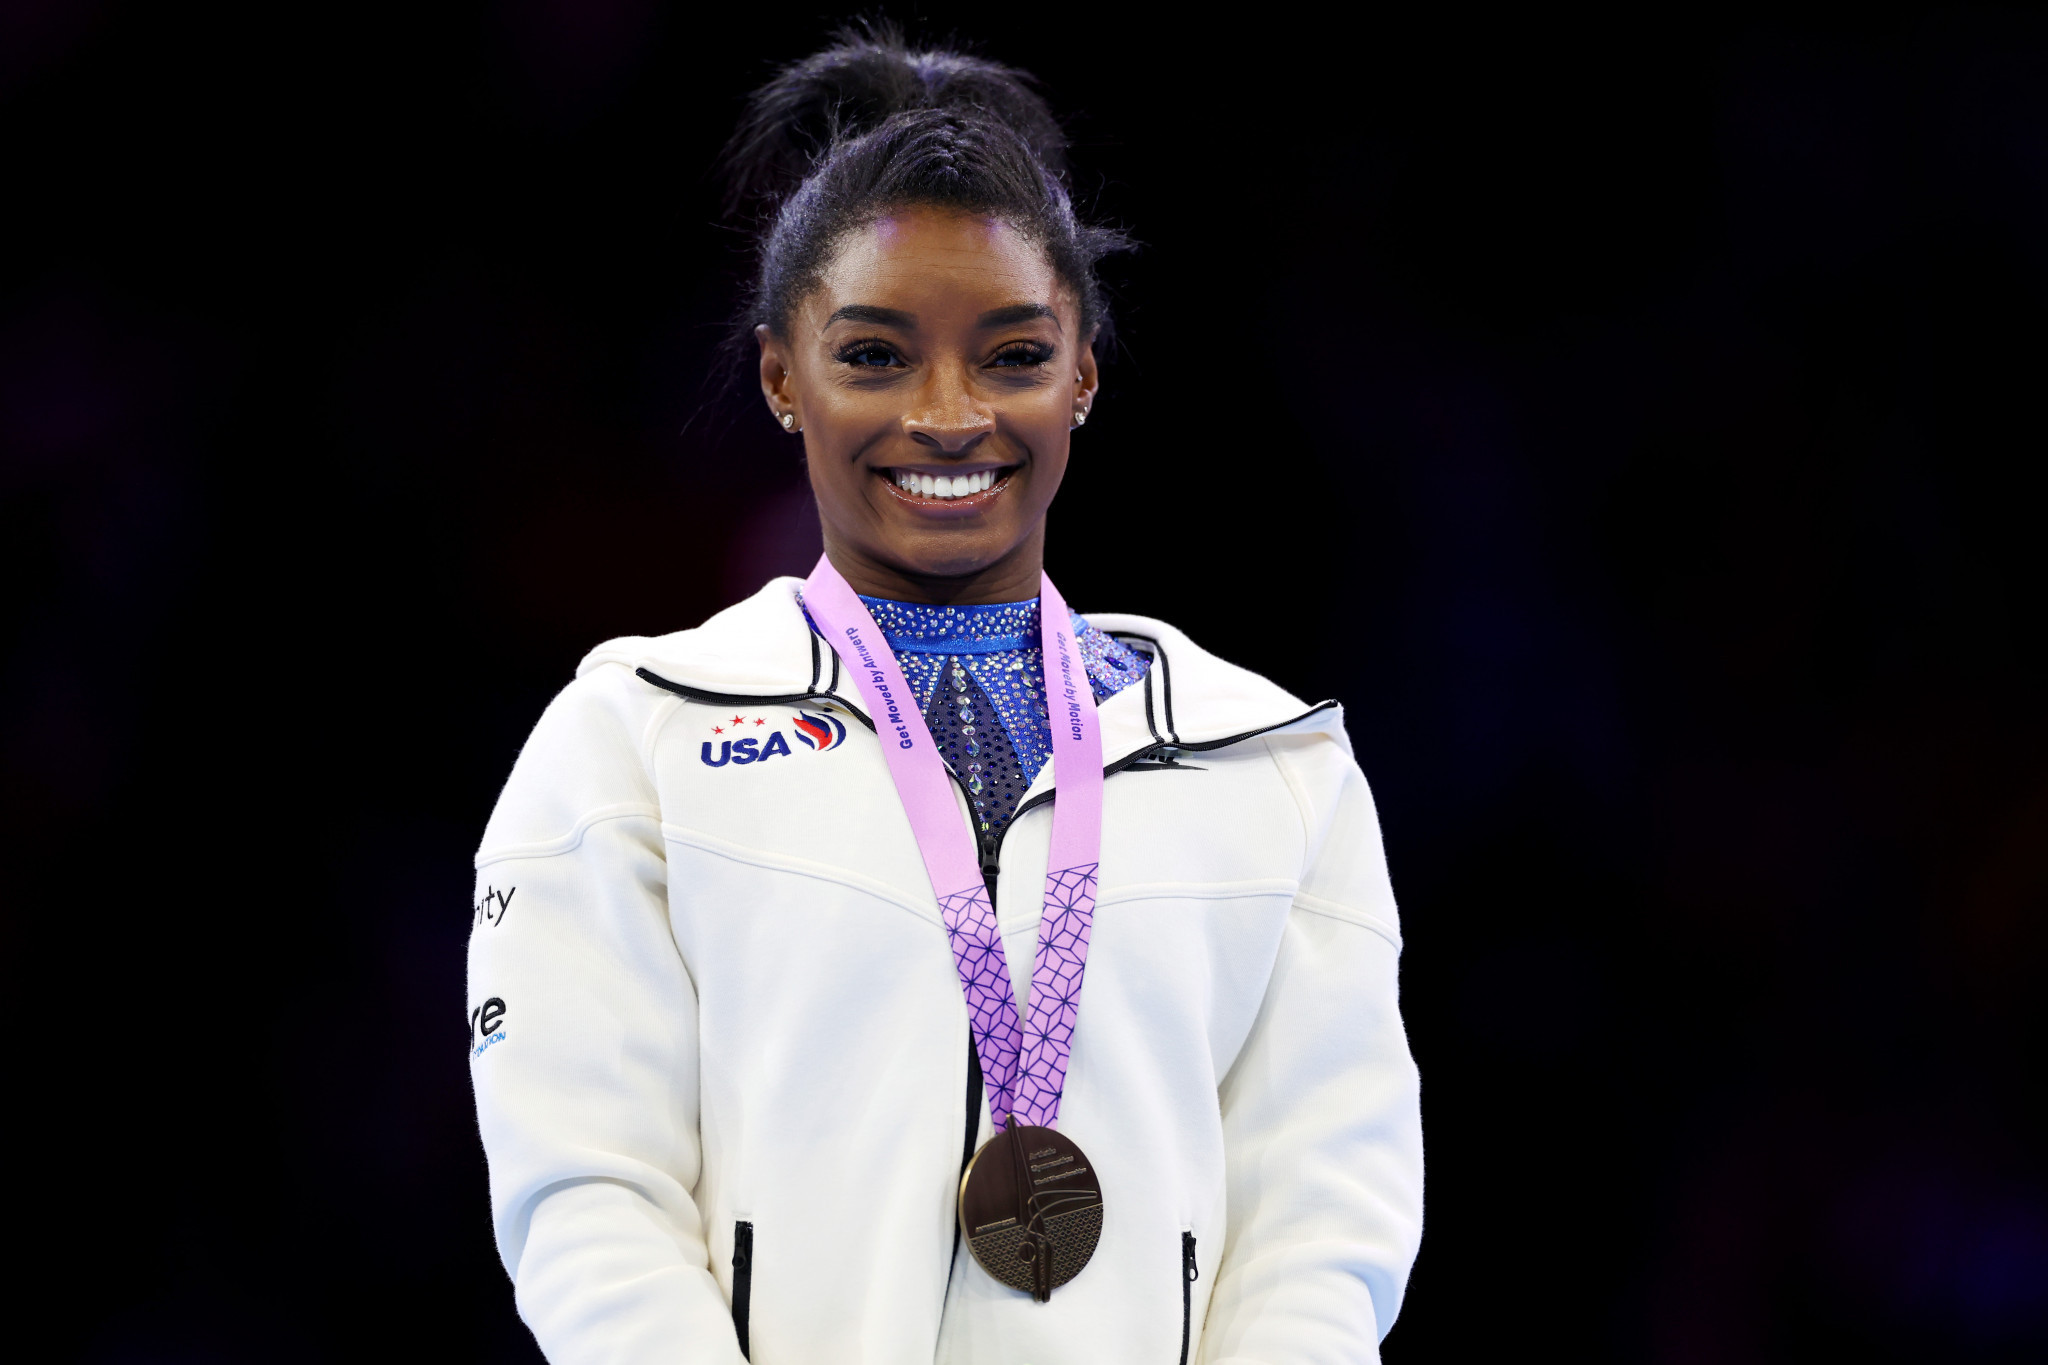 The US gymnast has made histrory after winning her second gold medal at the world Gymnastics Championships 